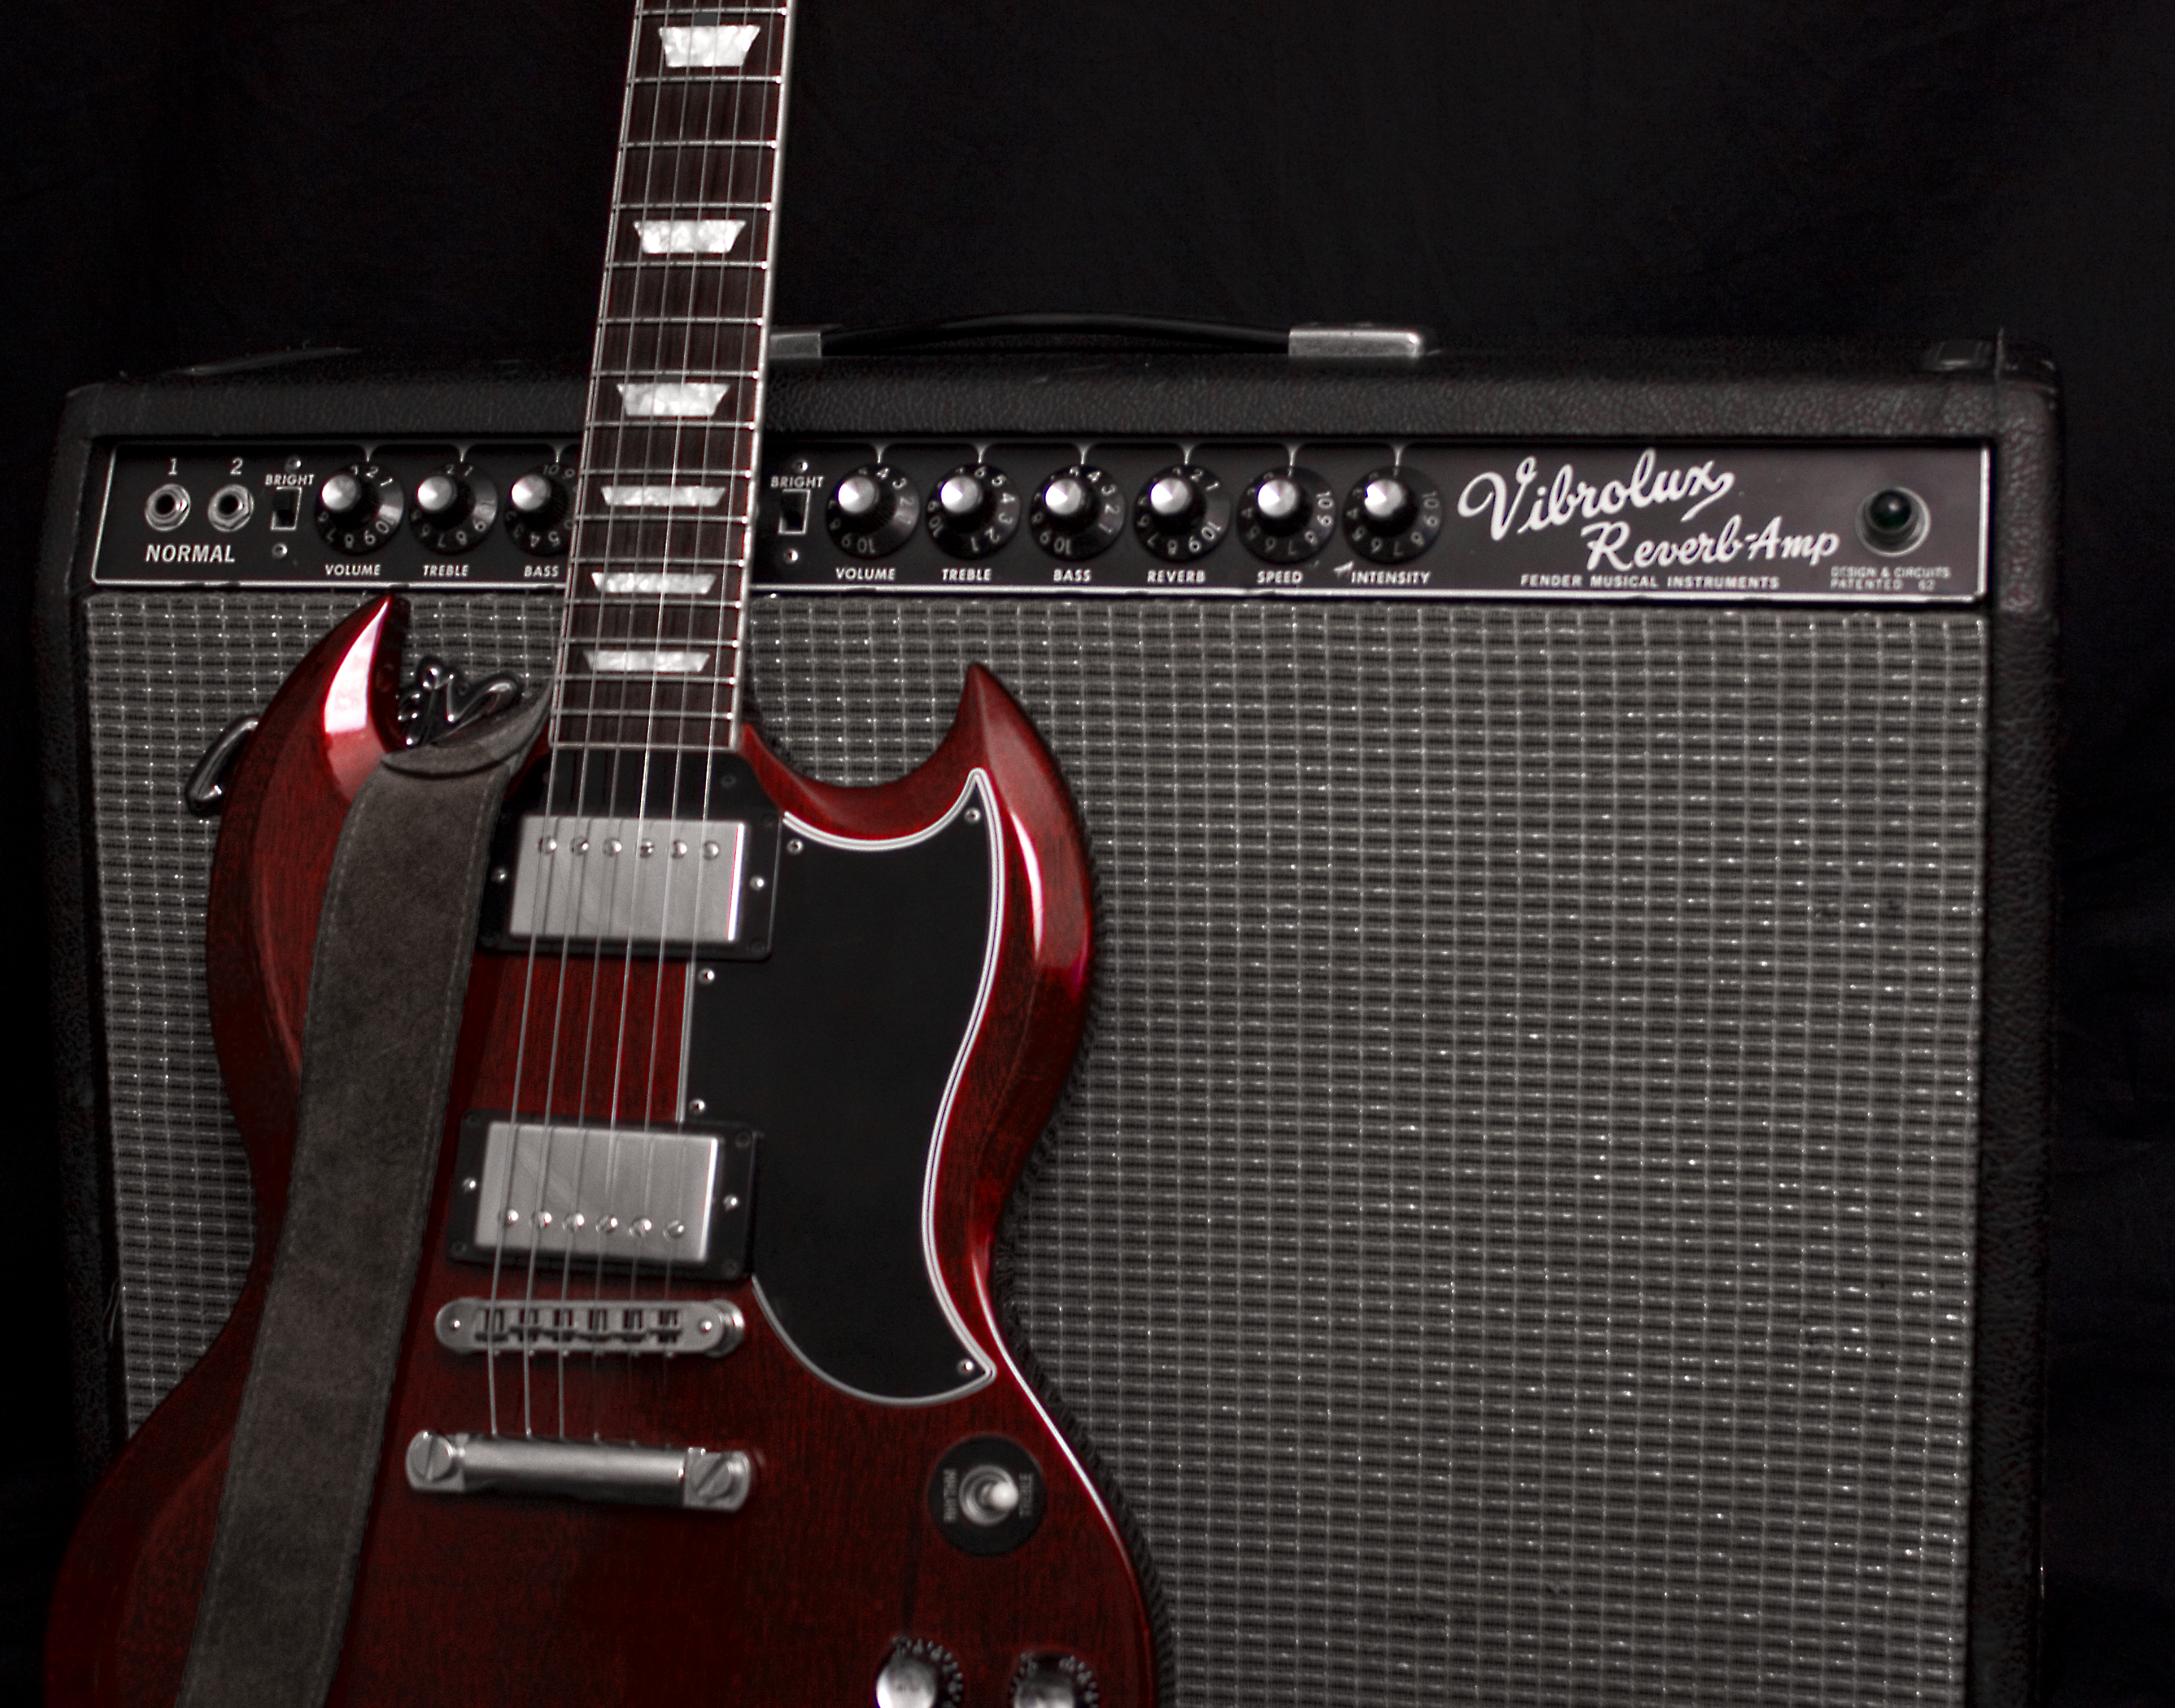 Fender_Vibrolux_Reverb_with_Gibson_SG.jpg